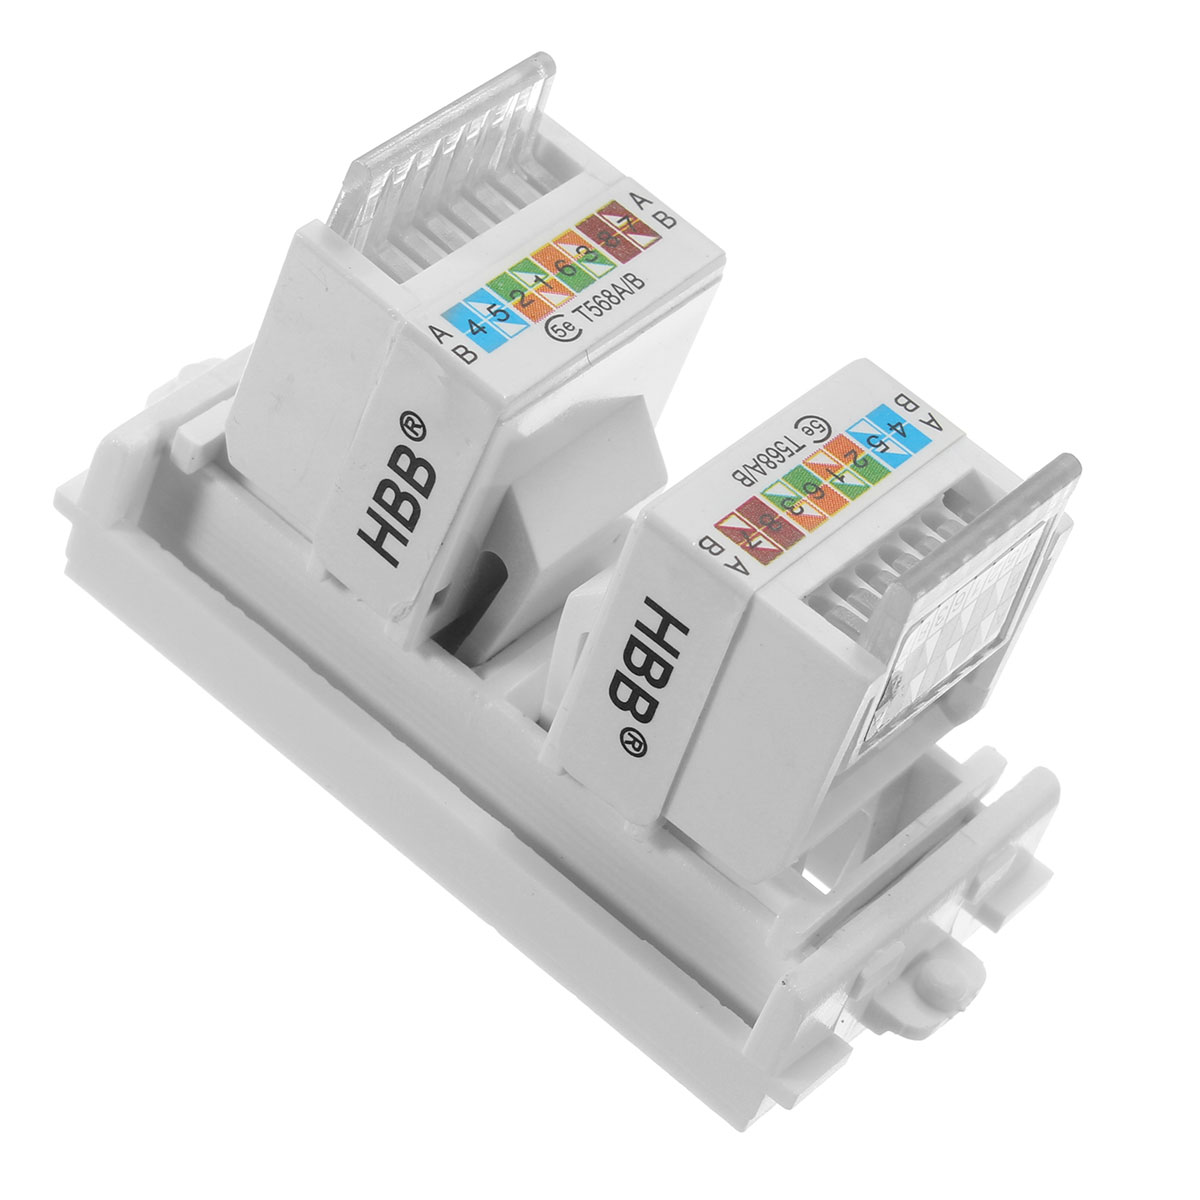 RJ45-Wall-Plate-Dual-Port-Socket-Panel-Building-Materials-Network-Combination-Connector-Module-1401148-10